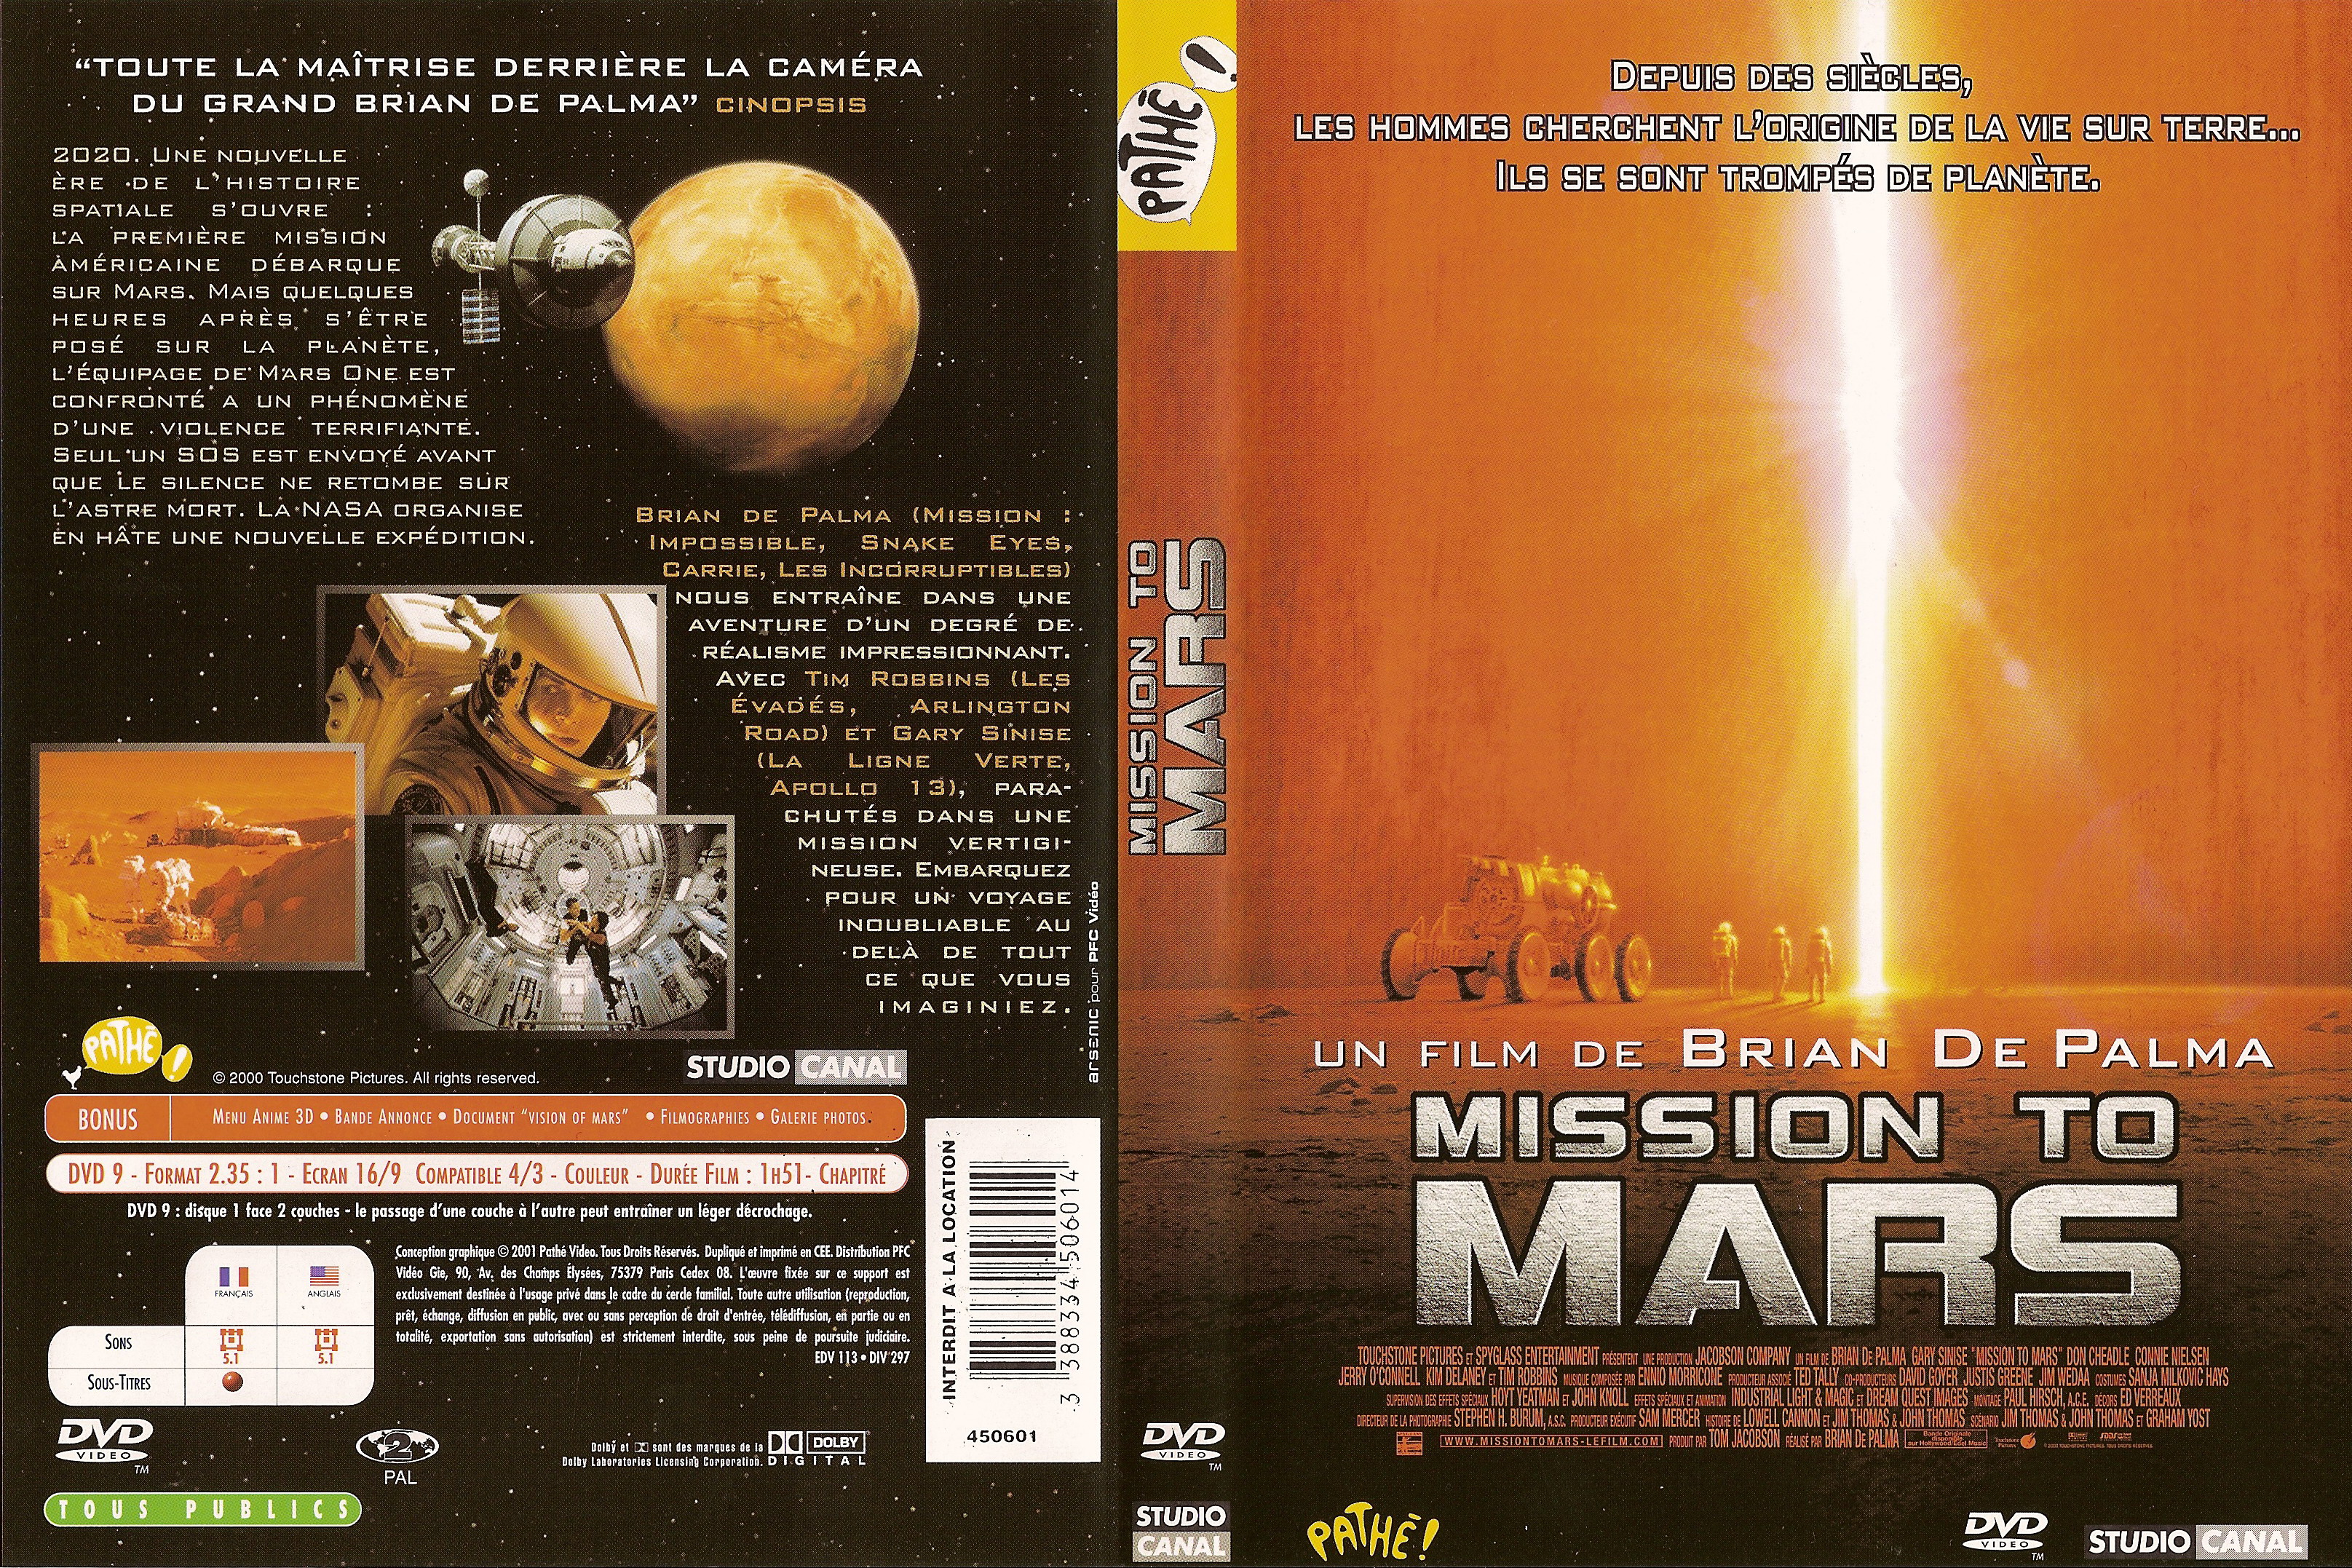 Jaquette DVD Mission to Mars